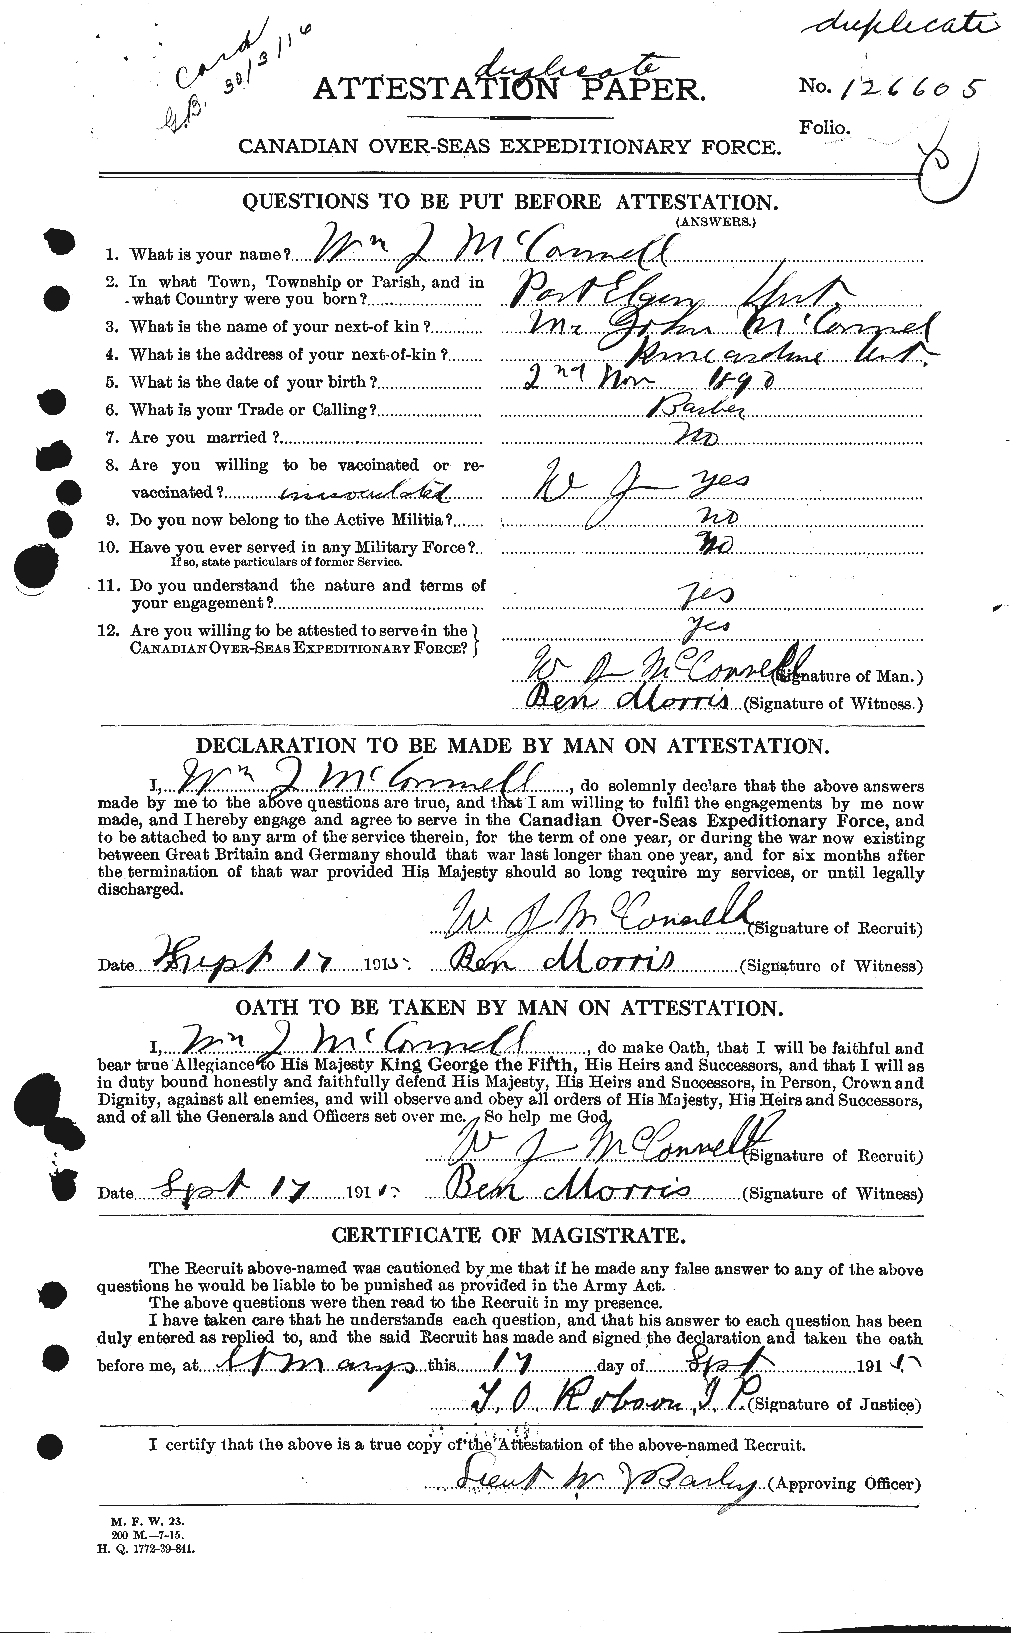 Personnel Records of the First World War - CEF 134228a